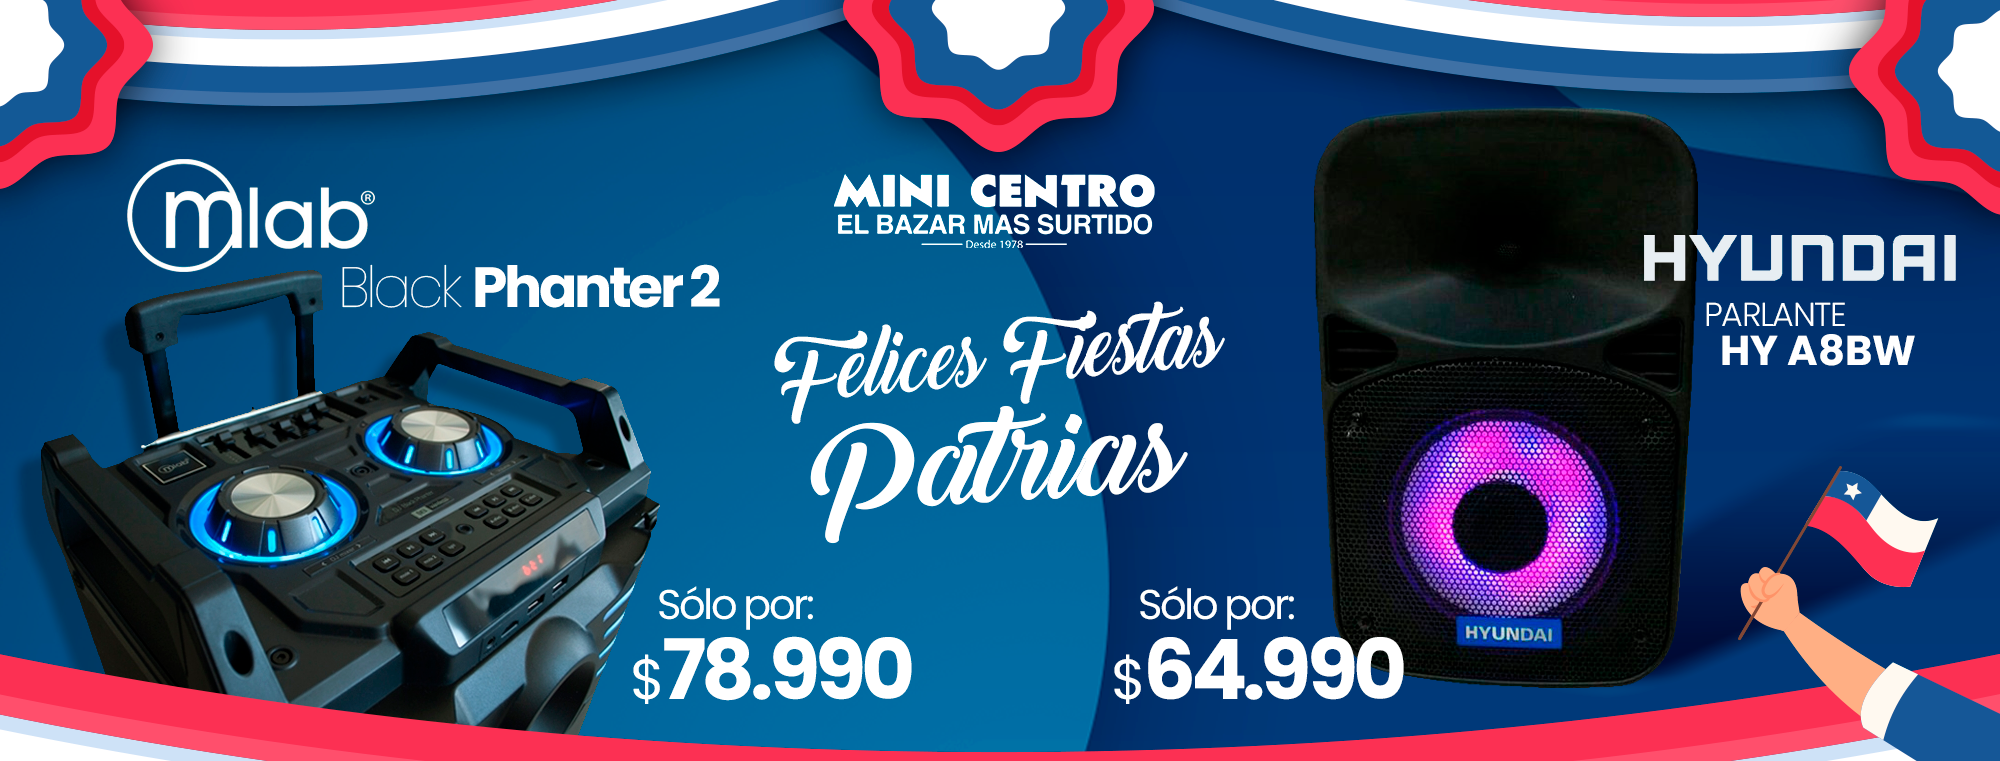 Banner_Chile_Minicentro.png